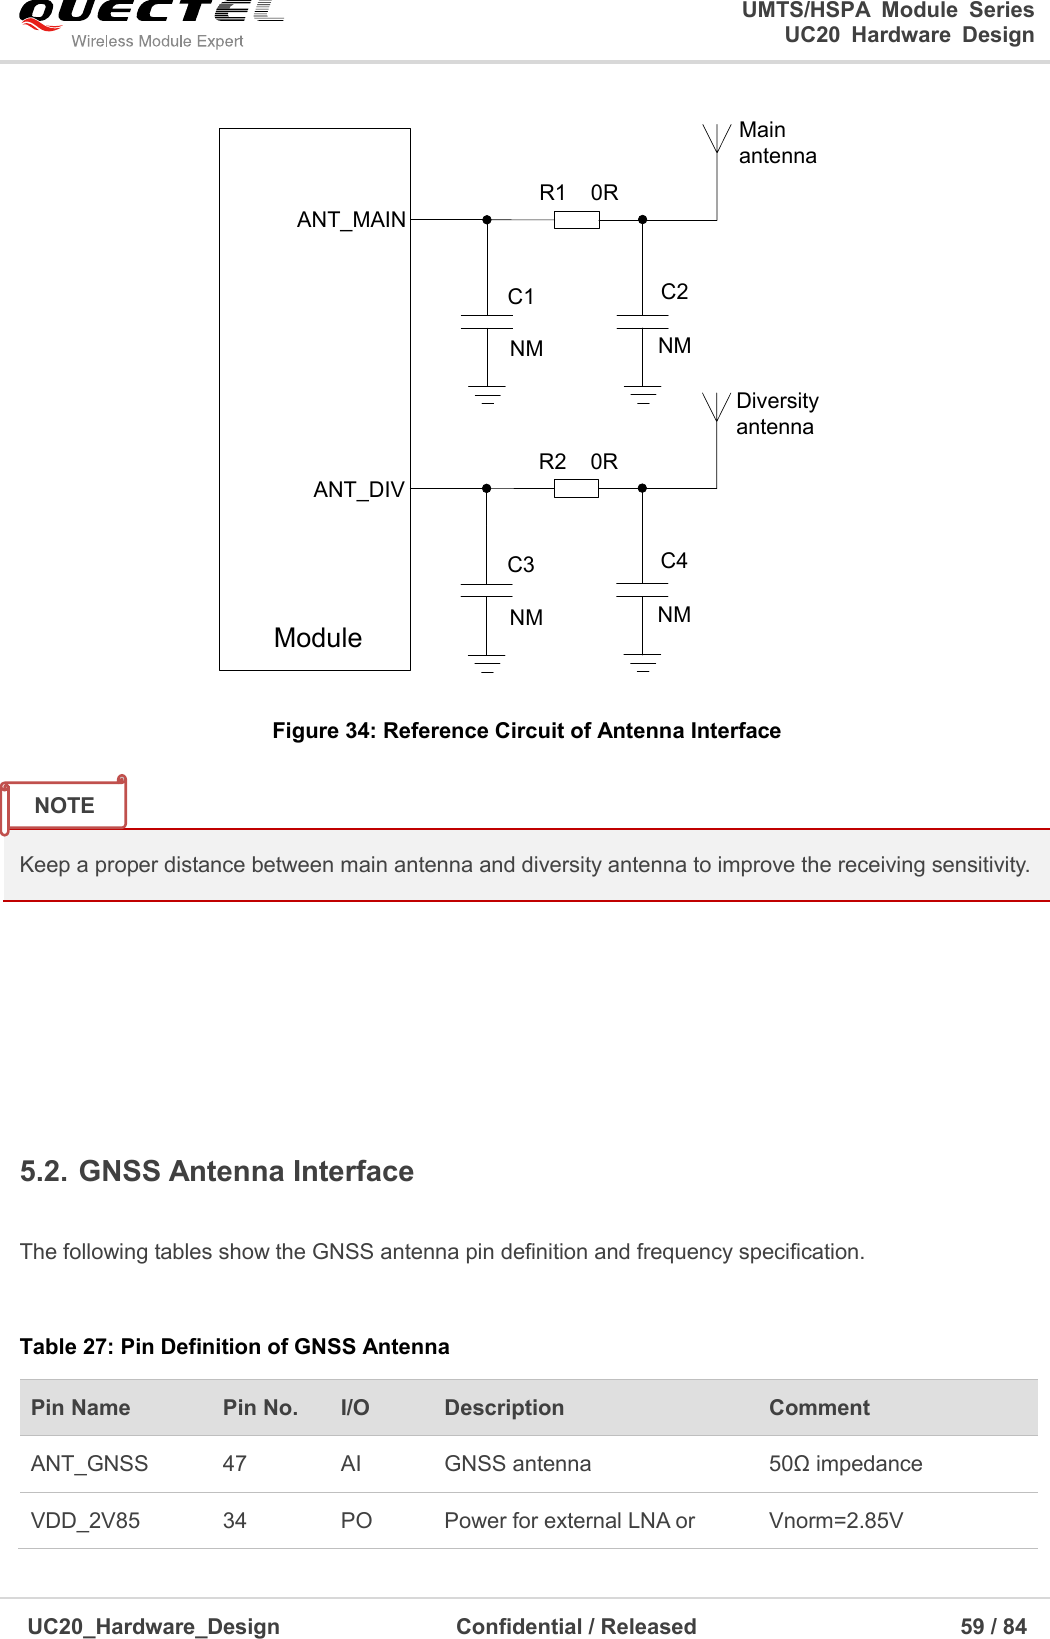                                                                                                                                               UMTS/HSPA  Module  Series                                                                 UC20  Hardware  Design  UC20_Hardware_Design                  Confidential / Released                            59 / 84     ANT_MAINR1    0RC1ModuleMainantennaNMC2NMR2    0RC3Diversity antennaNMC4NMANT_DIV Figure 34: Reference Circuit of Antenna Interface  Keep a proper distance between main antenna and diversity antenna to improve the receiving sensitivity.       5.2. GNSS Antenna Interface  The following tables show the GNSS antenna pin definition and frequency specification.  Table 27: Pin Definition of GNSS Antenna Pin Name   Pin No. I/O Description   Comment ANT_GNSS 47 AI GNSS antenna 50Ω impedance VDD_2V85 34 PO Power for external LNA or Vnorm=2.85V NOTE 